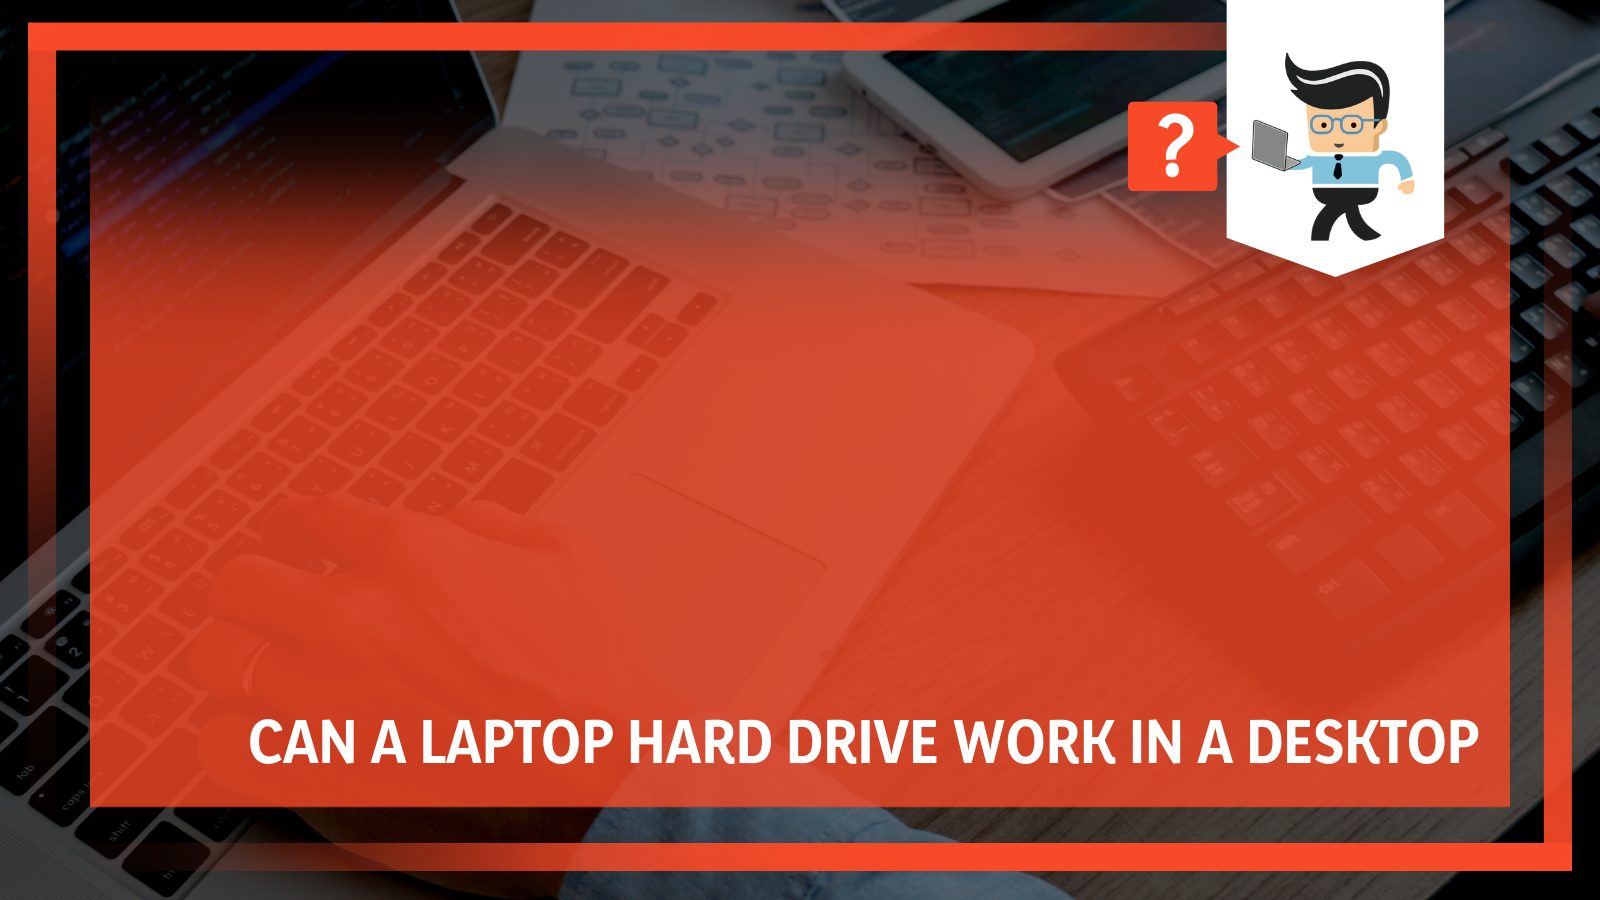 Can a laptop hard drive work in a desktop complete answer x